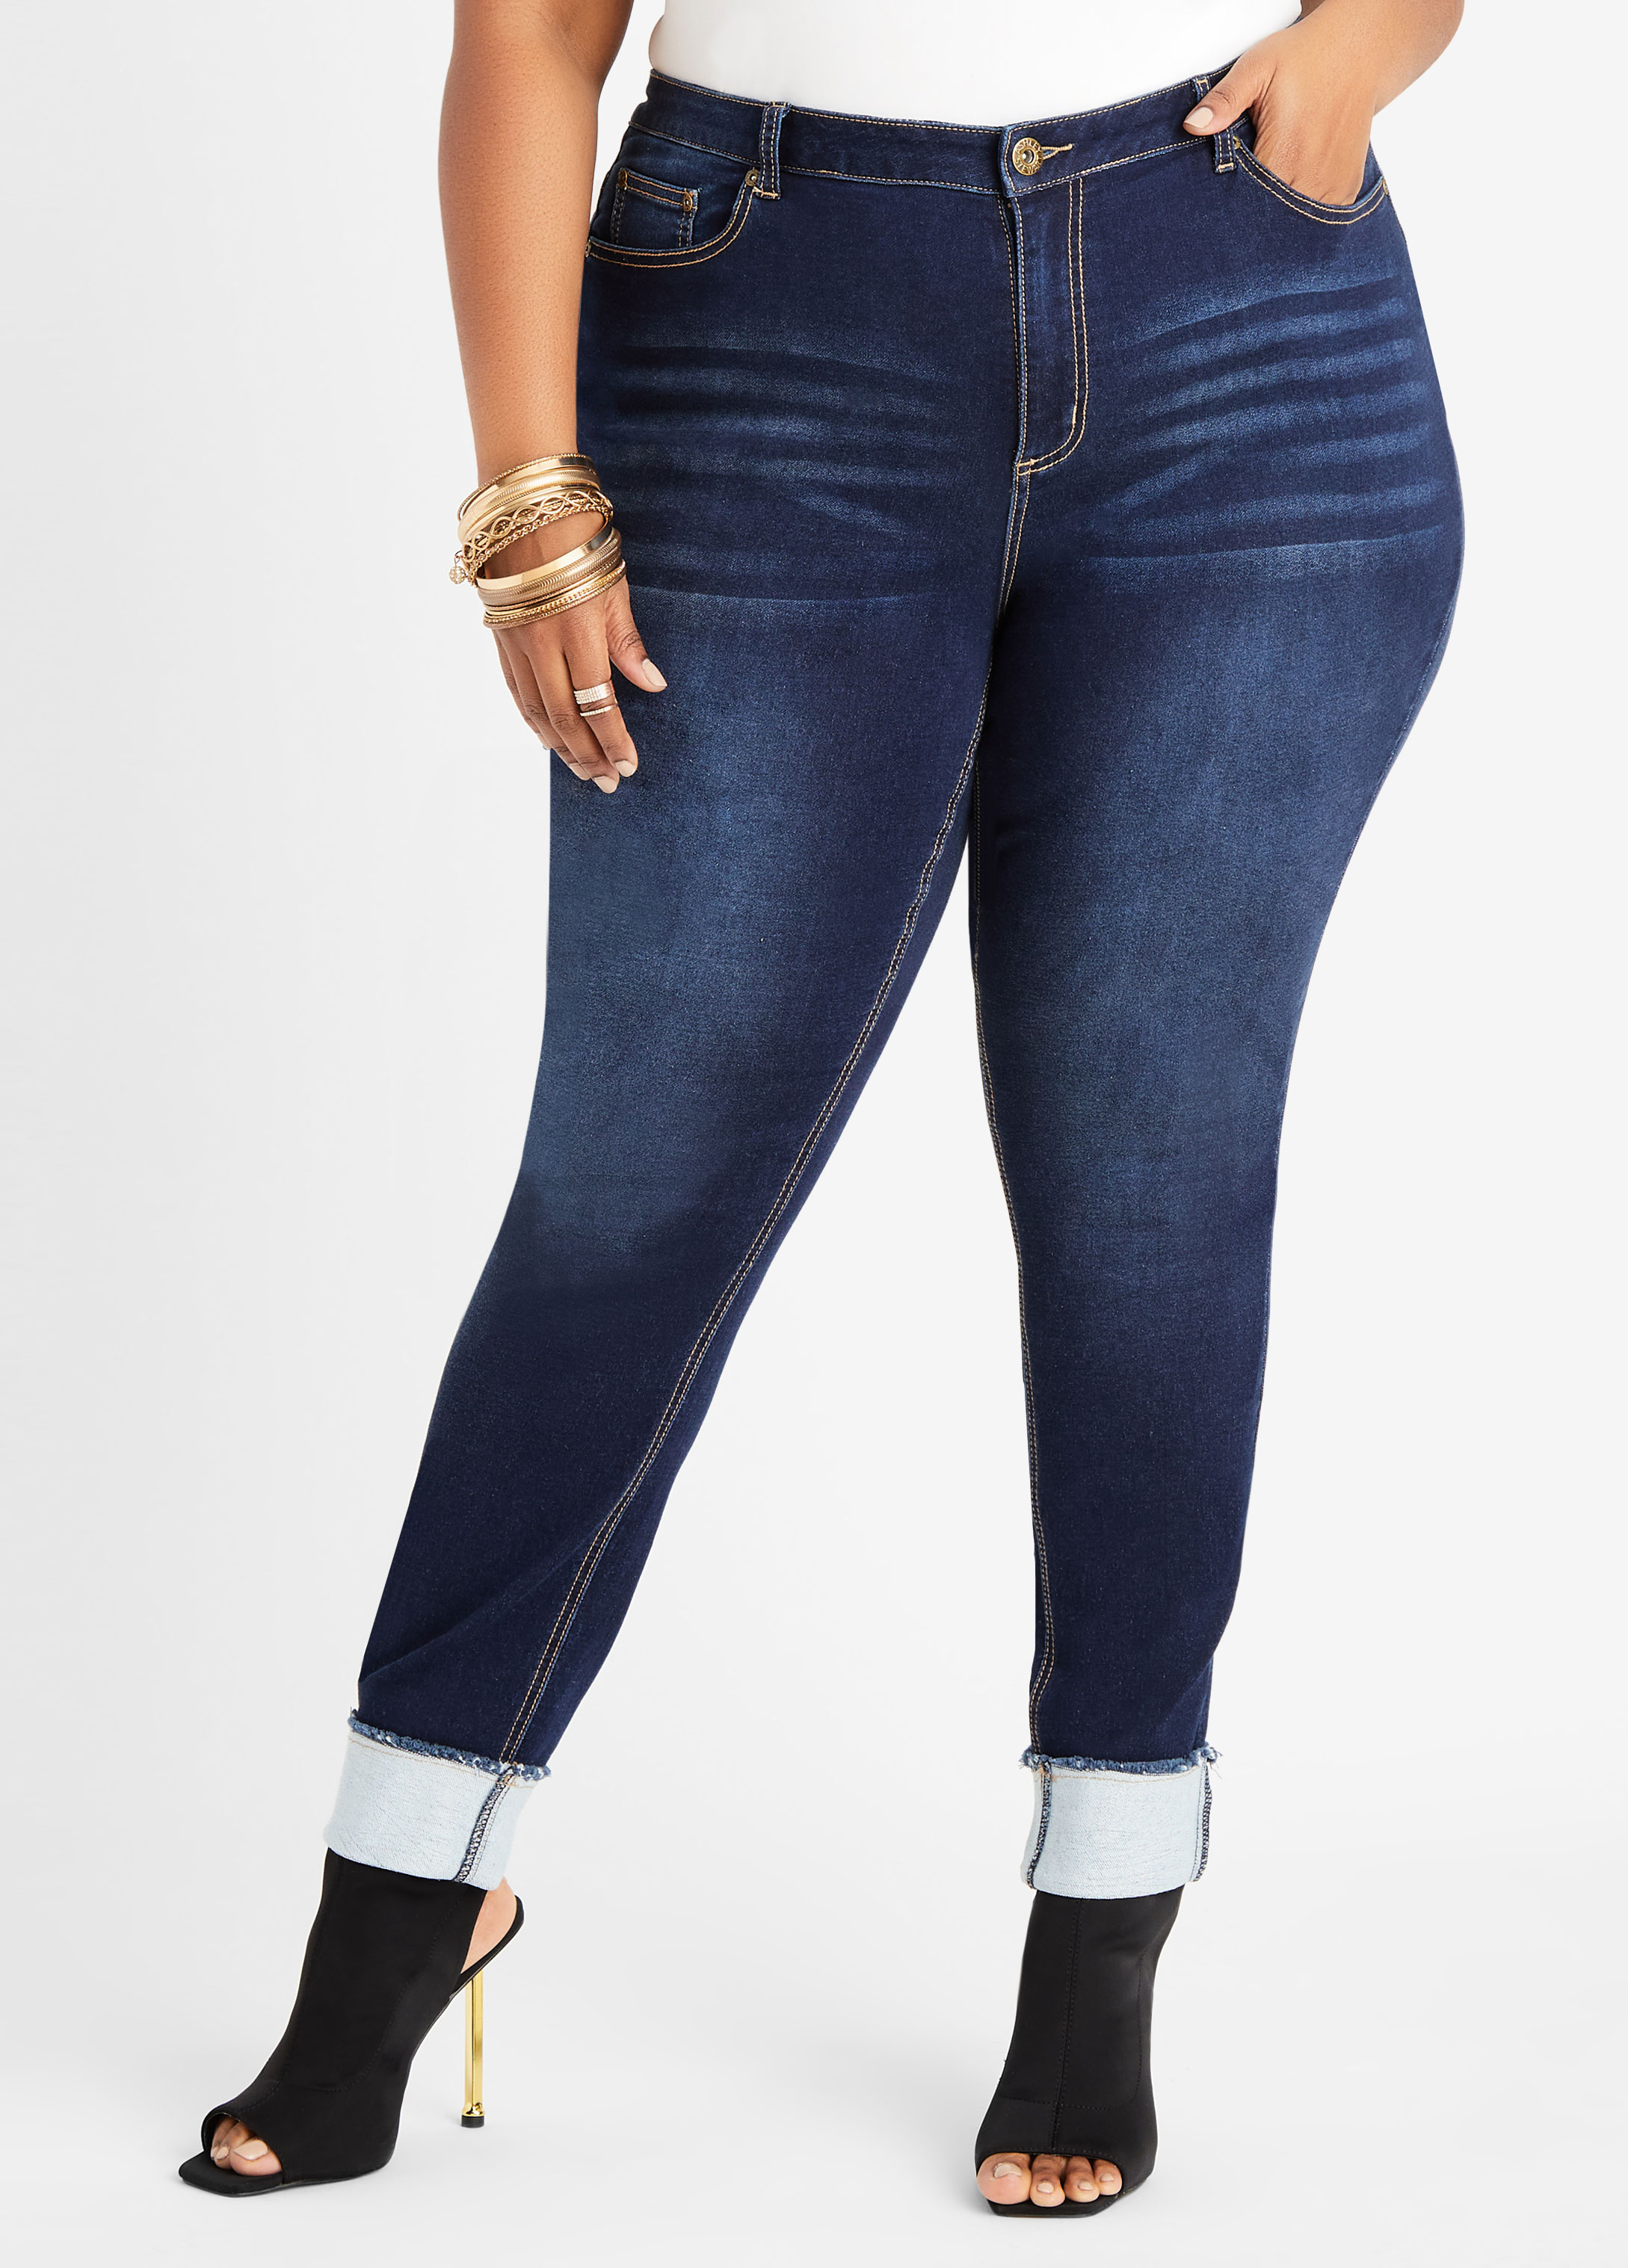 Plus Size Stretch Cotton Skinny Jeans Plus Size High Waisted Jeans